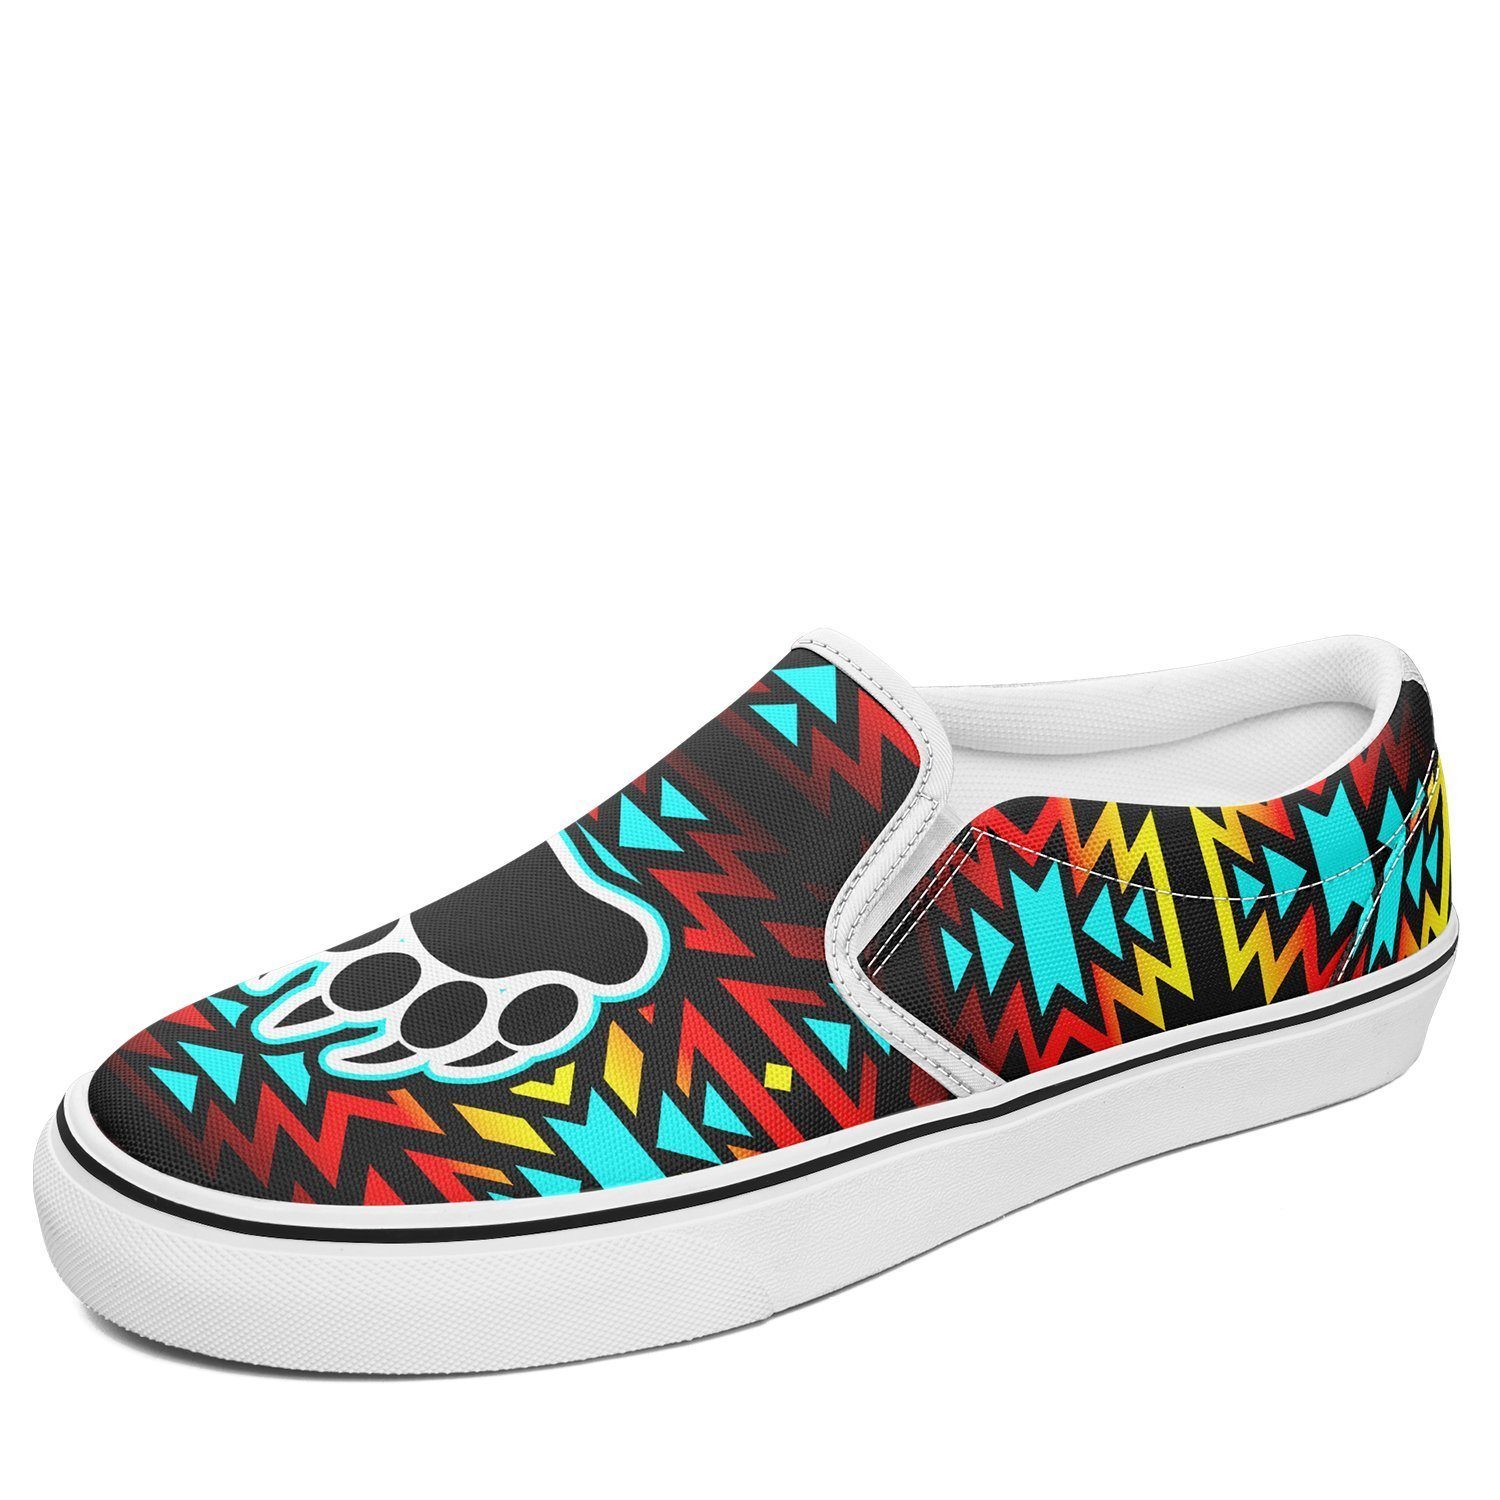 Fire Colors and Turquoise Bearpaw Otoyimm Kid's Canvas Slip On Shoes 49 Dzine US Youth 1 / EUR 32 White Sole 